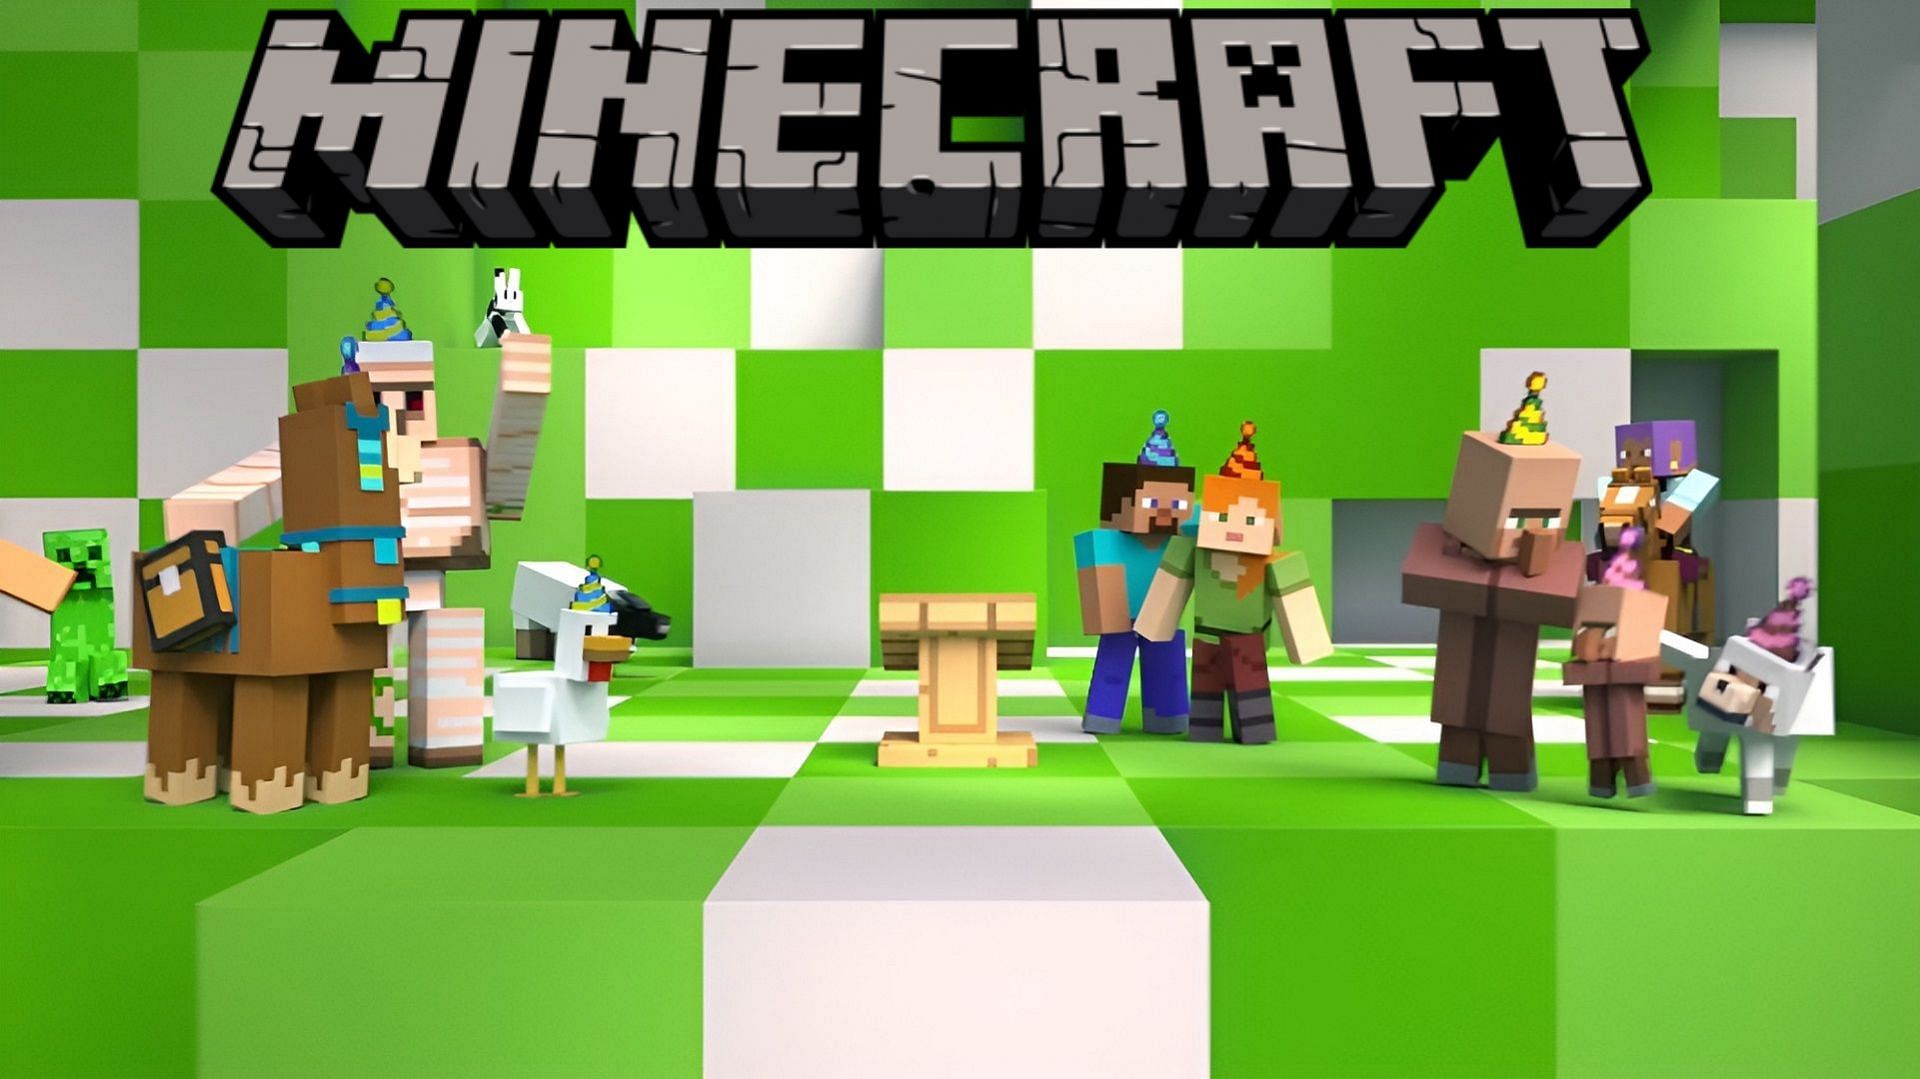 Minecraft 15th year anniversary: Looking back at the biggest accomplishments of everyone